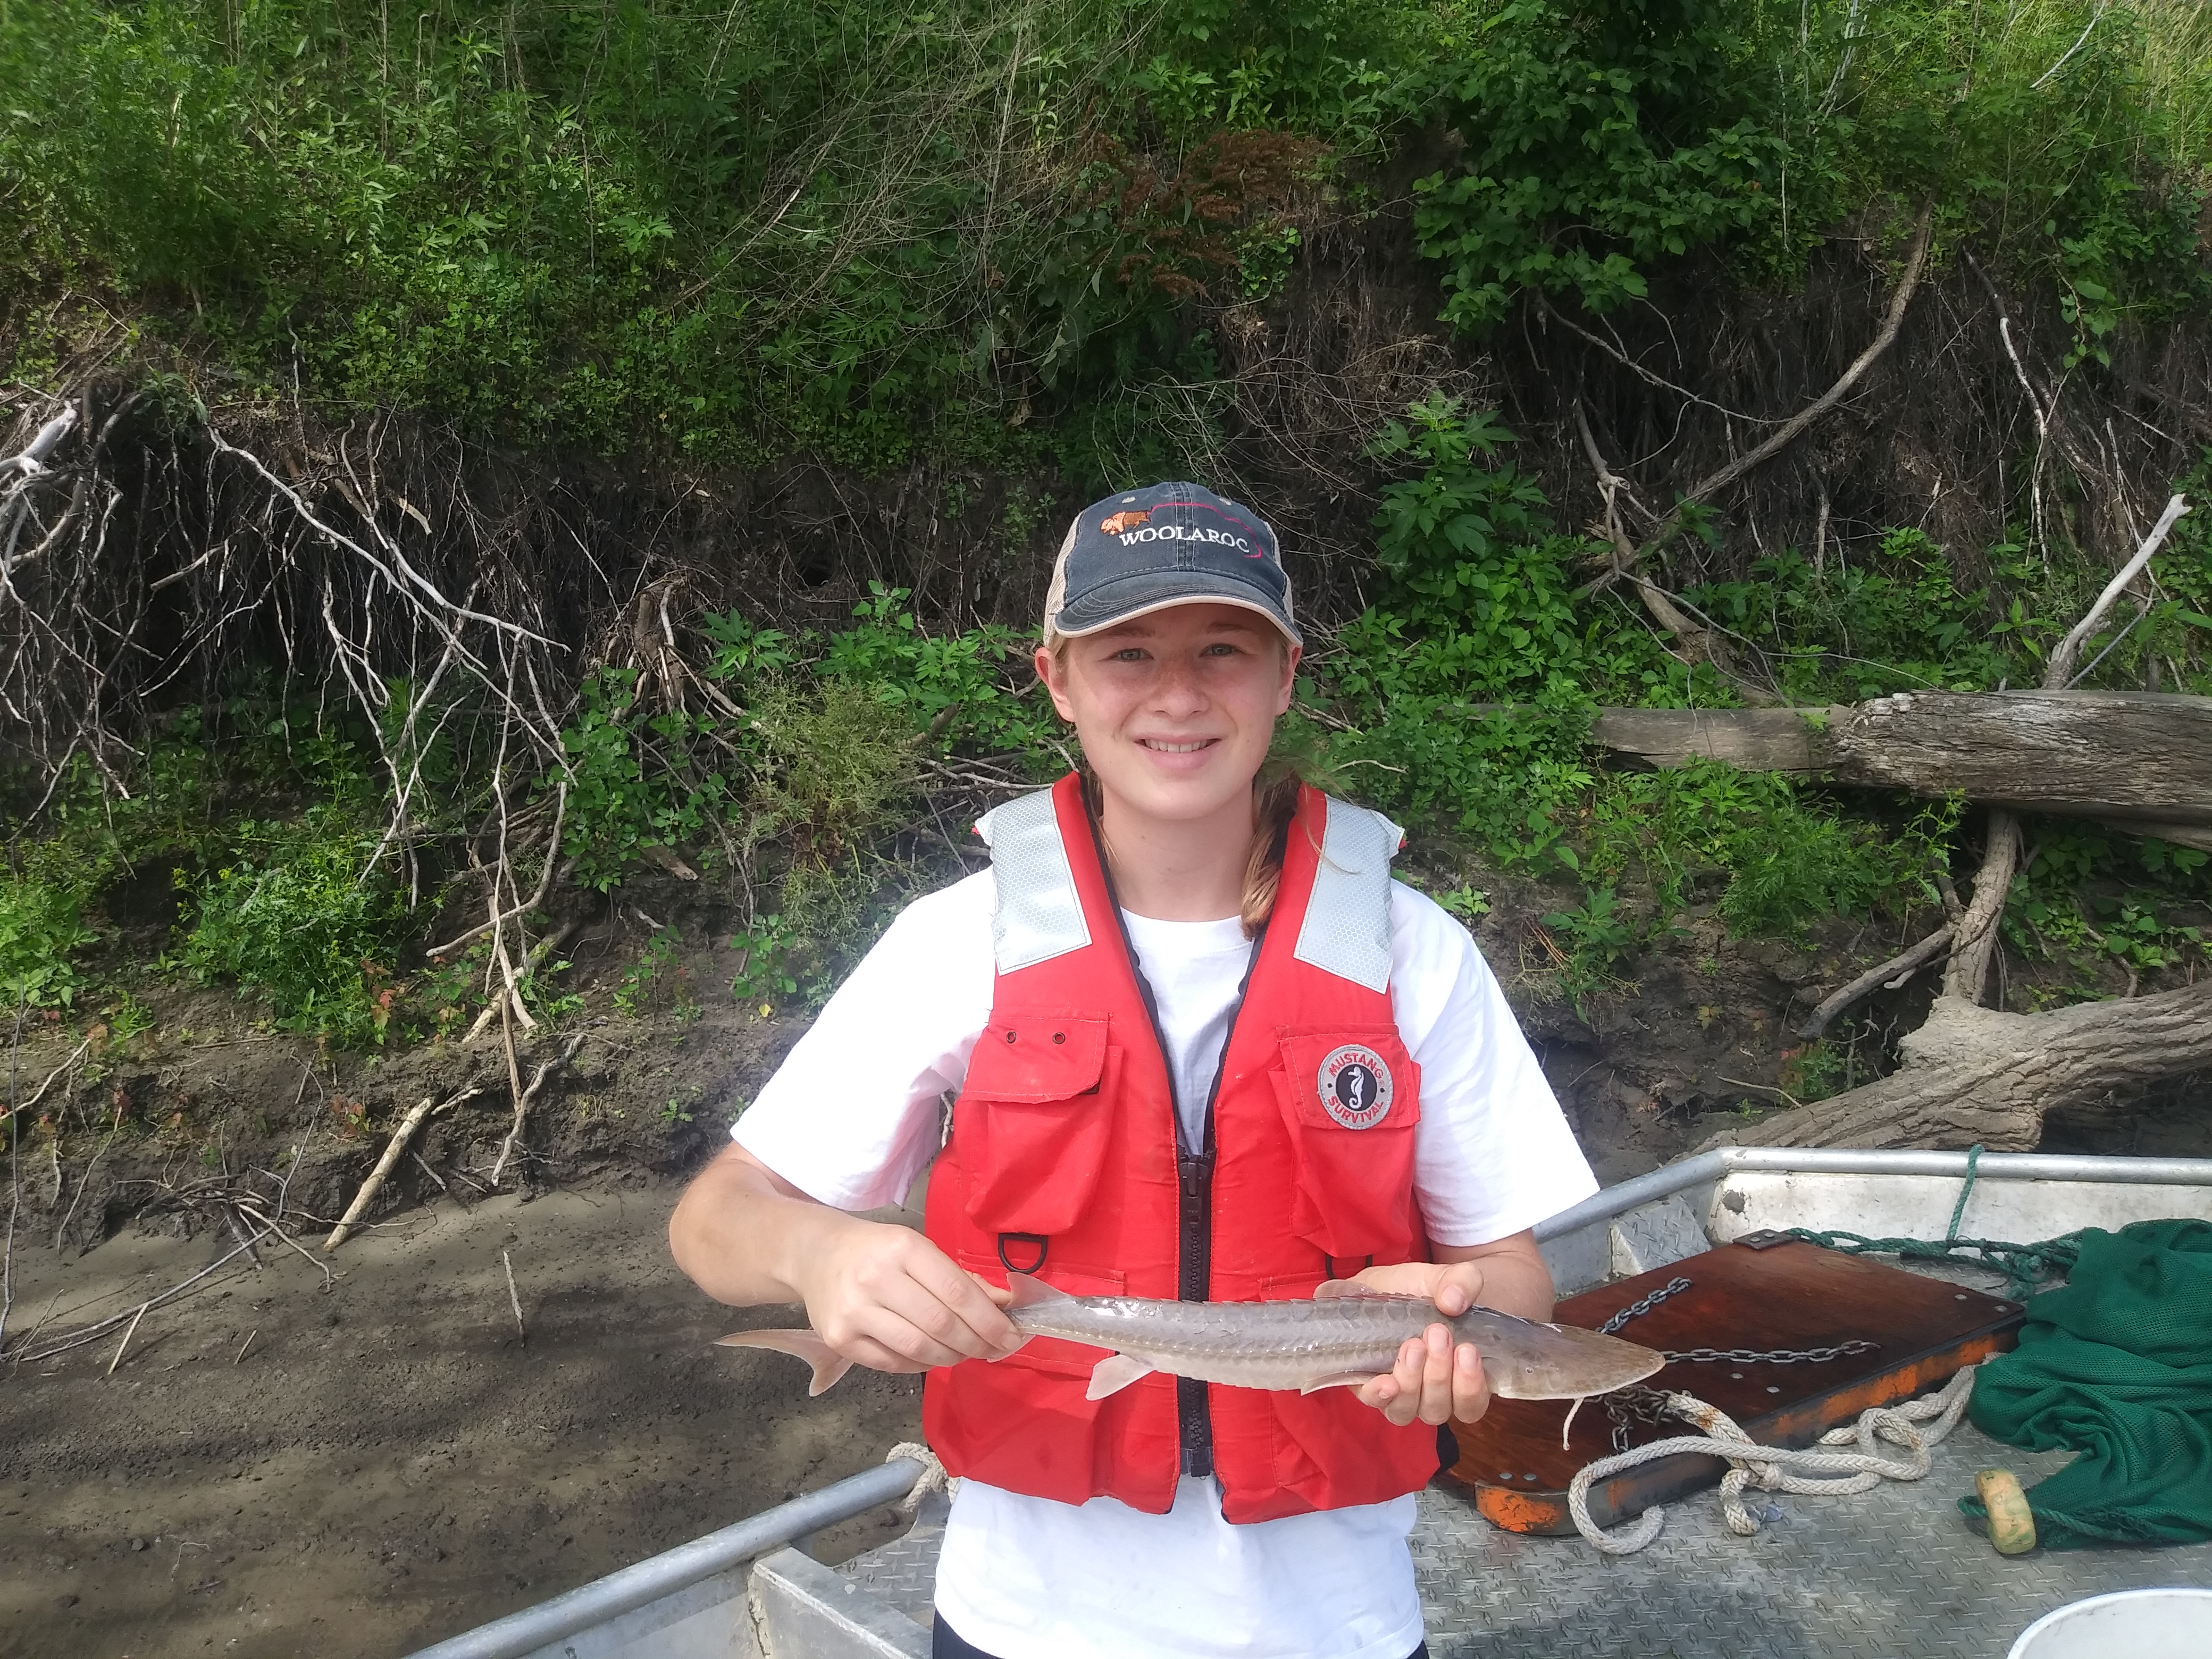 Ella Humphrey, a rising senior at Westside High School in Omaha, took part in an eight-week fisheries internship with University of Nebraska faculty after successfully applying to be part of the nationwide Hutton Junior Fisheries Biology Program. 